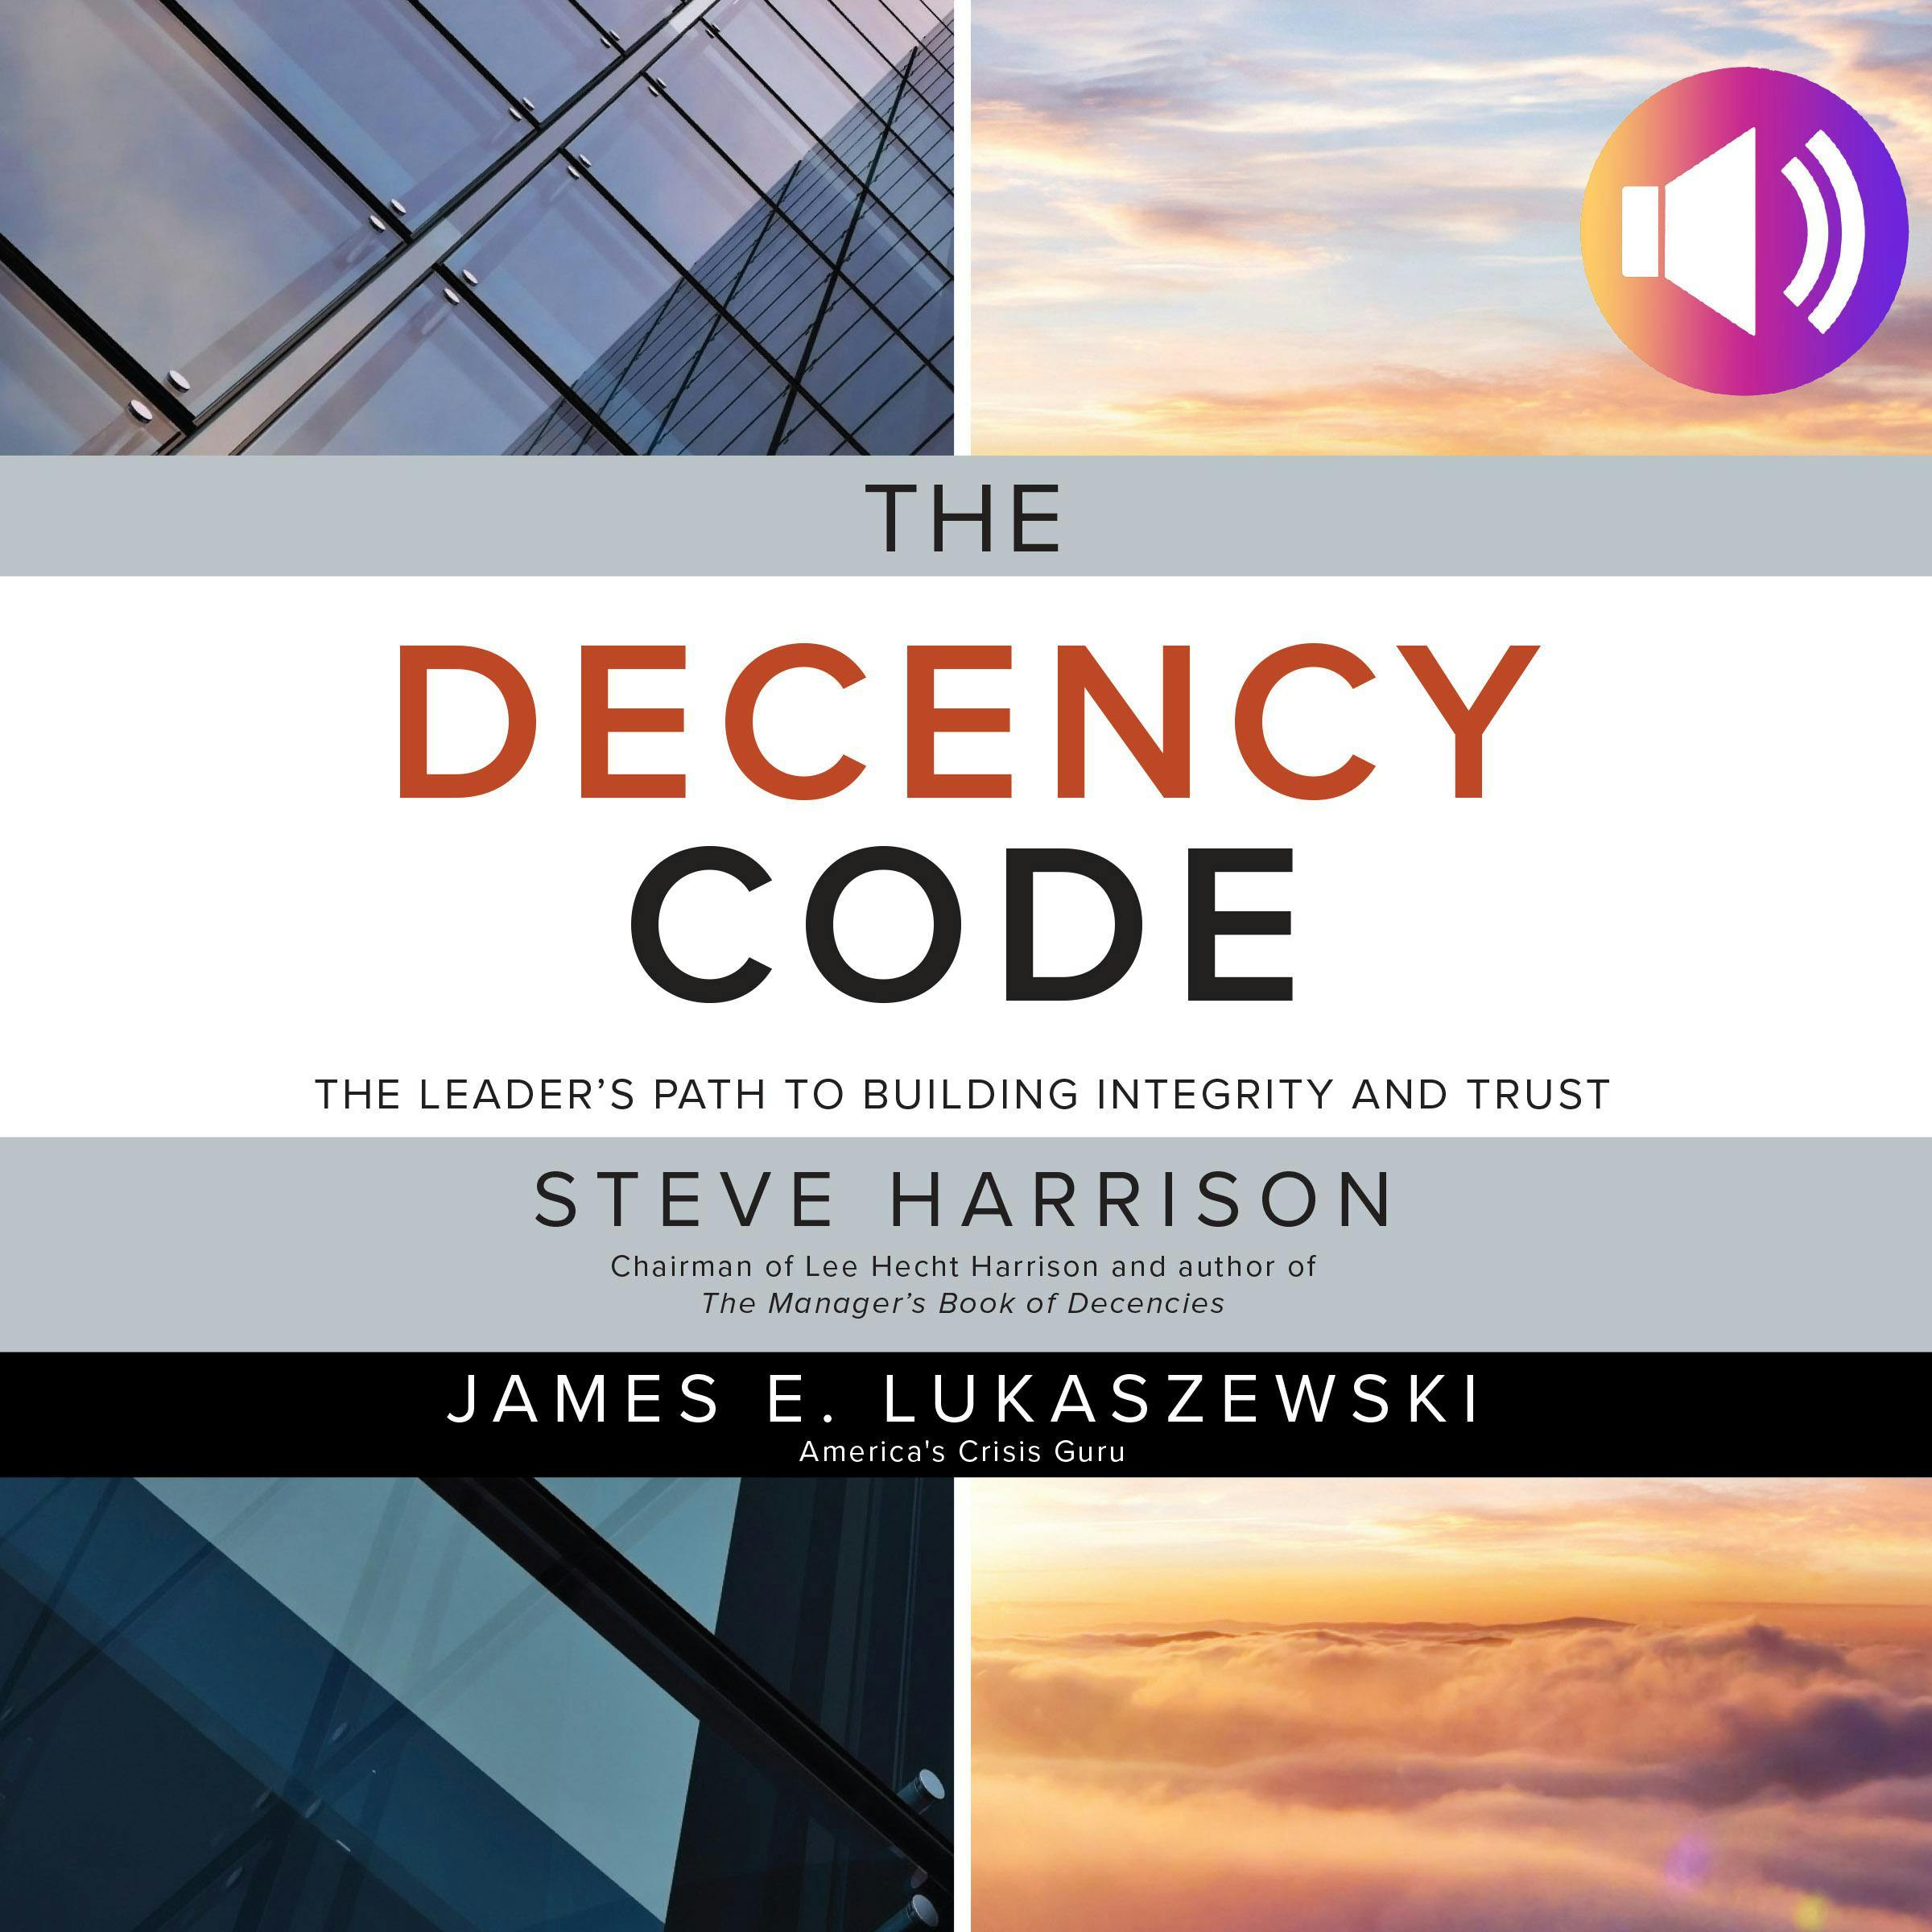 The Decency Code: The Leader's Path to Building Integrity and Trust - James E. Lukaszewski, Steve Harrison